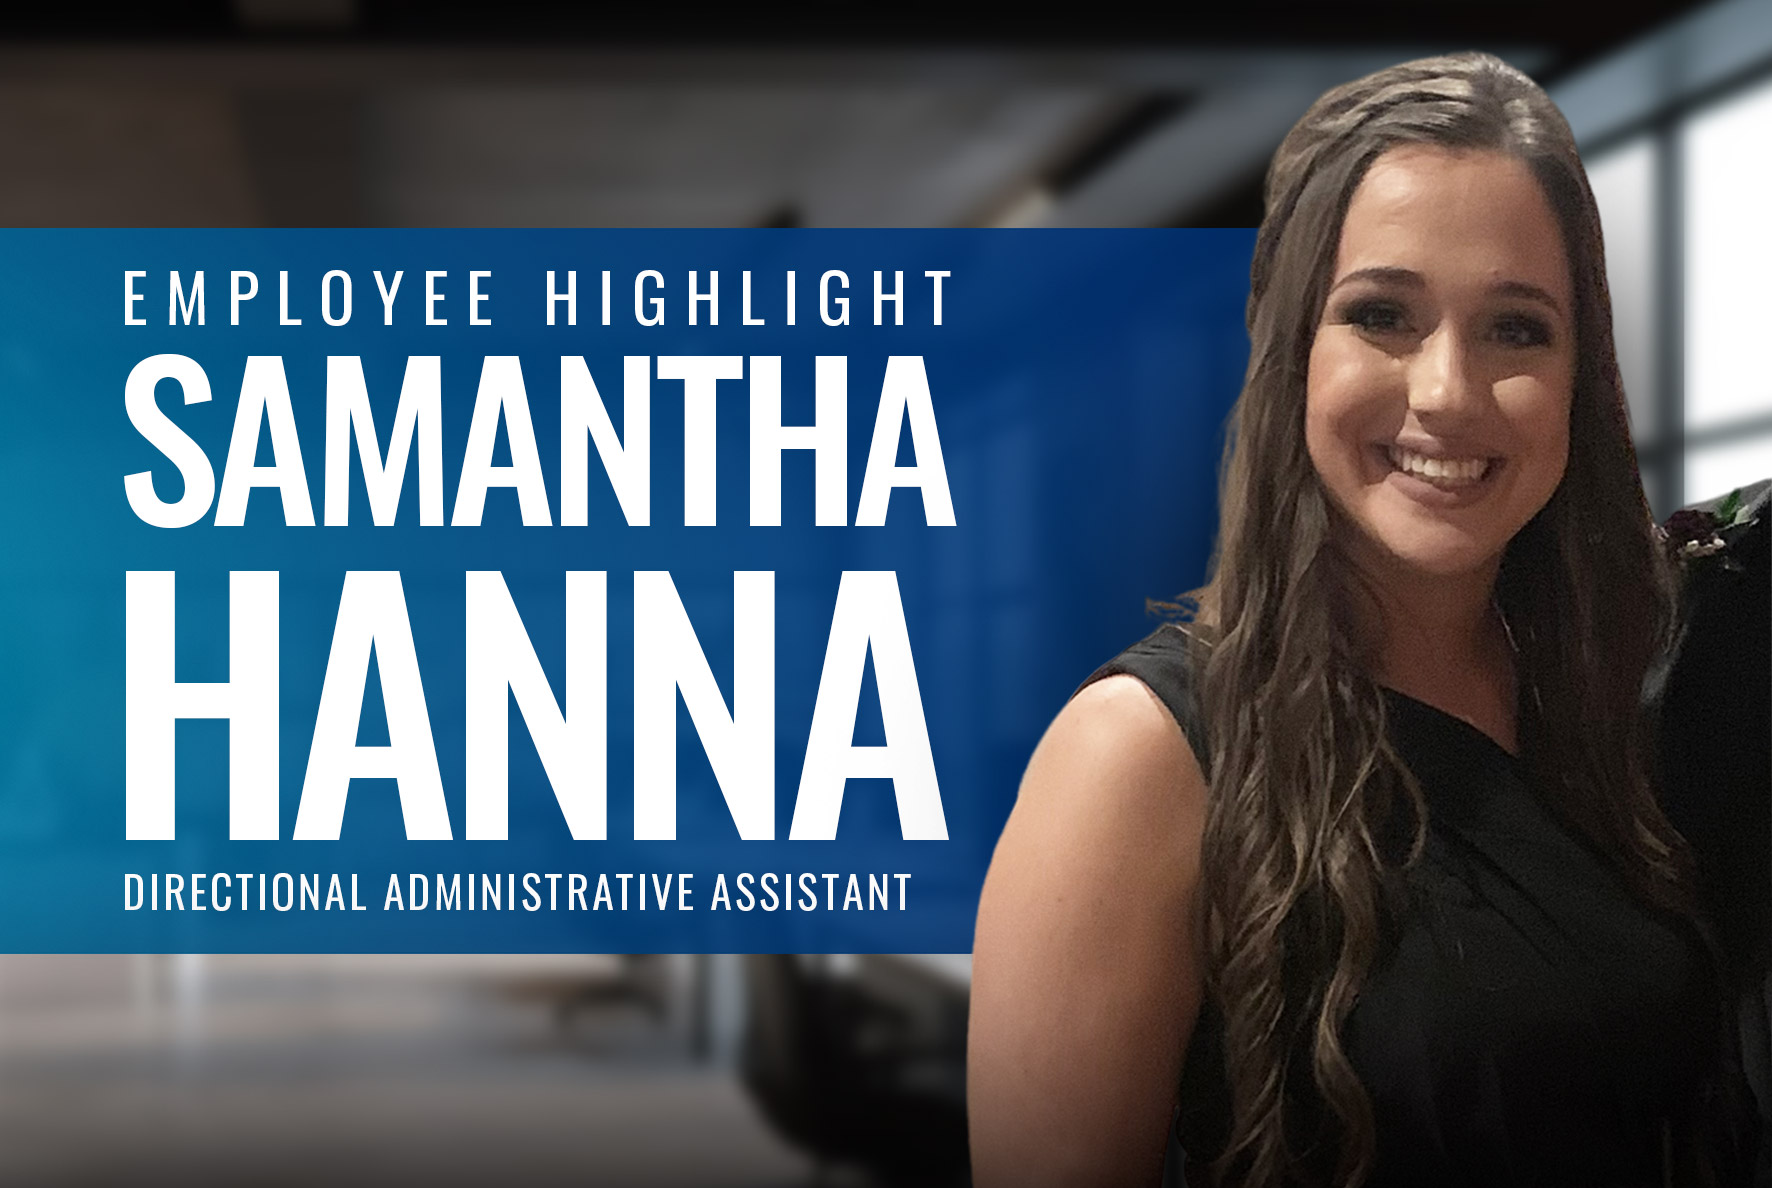 Featured image for “Employee Highlight: Samantha Hanna”